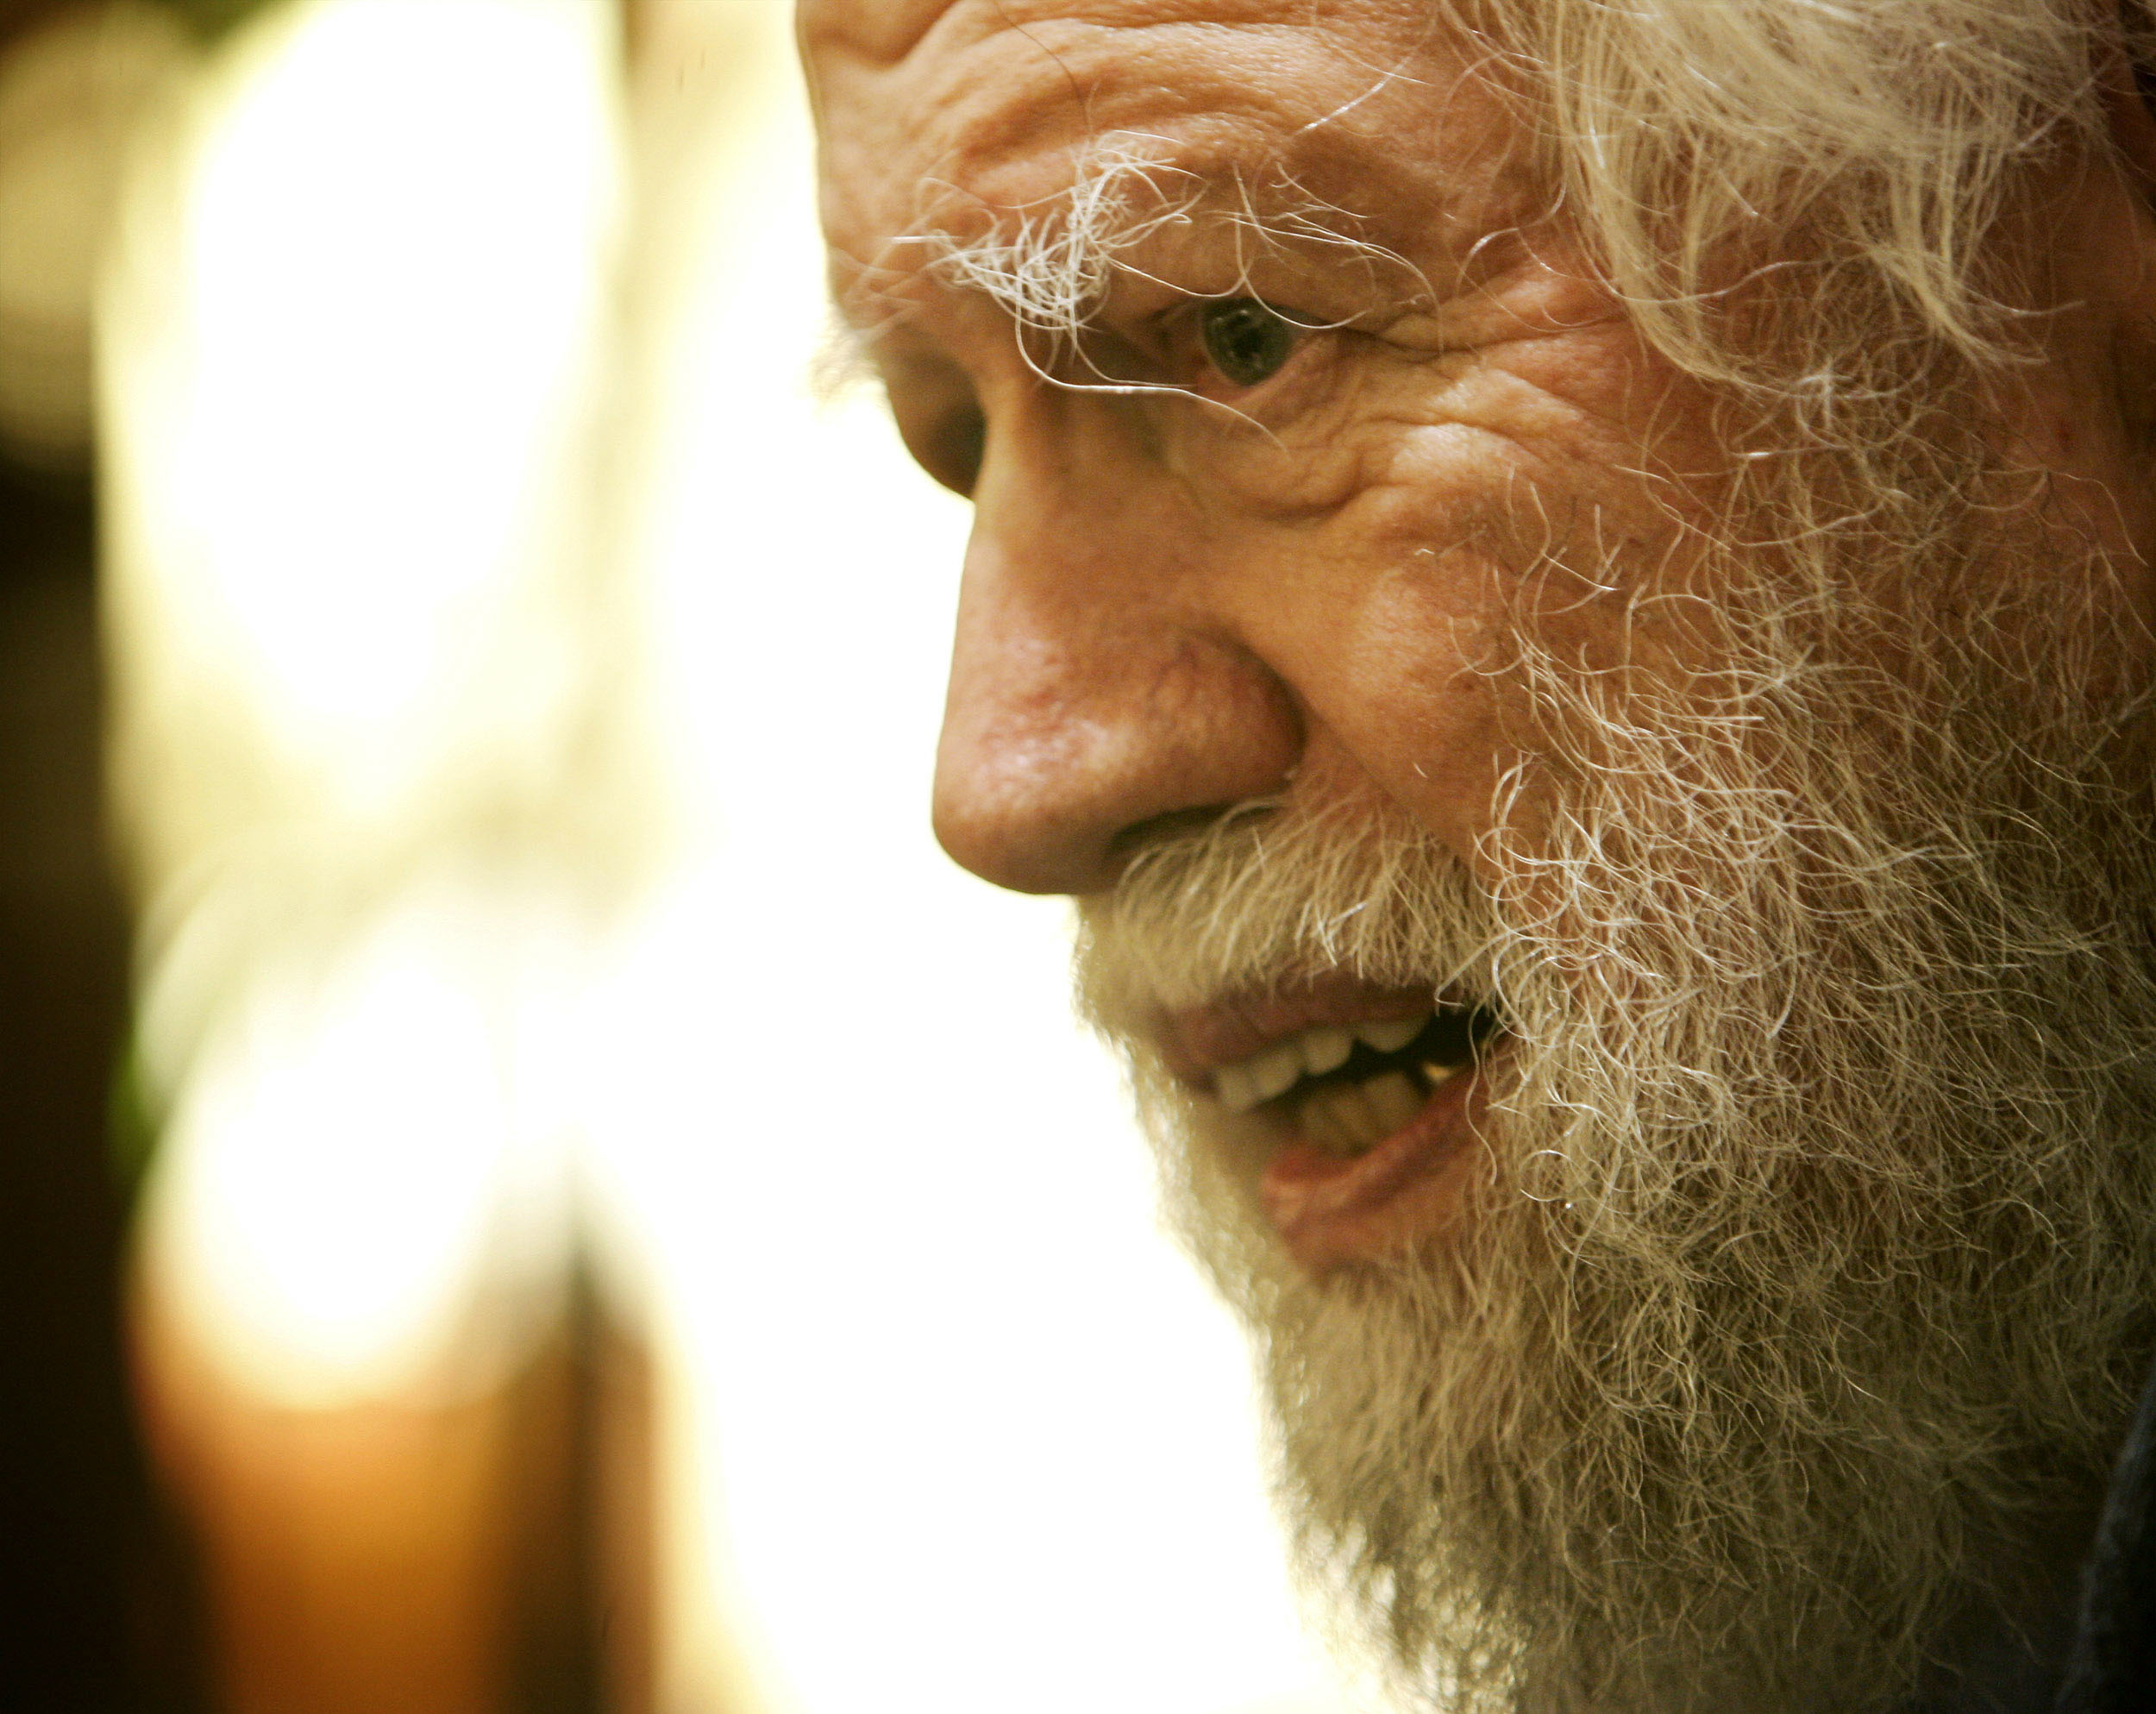 Alexander Shulgin, pharmacologist and chemist known for his creation of new psychoactive chemicals, ..